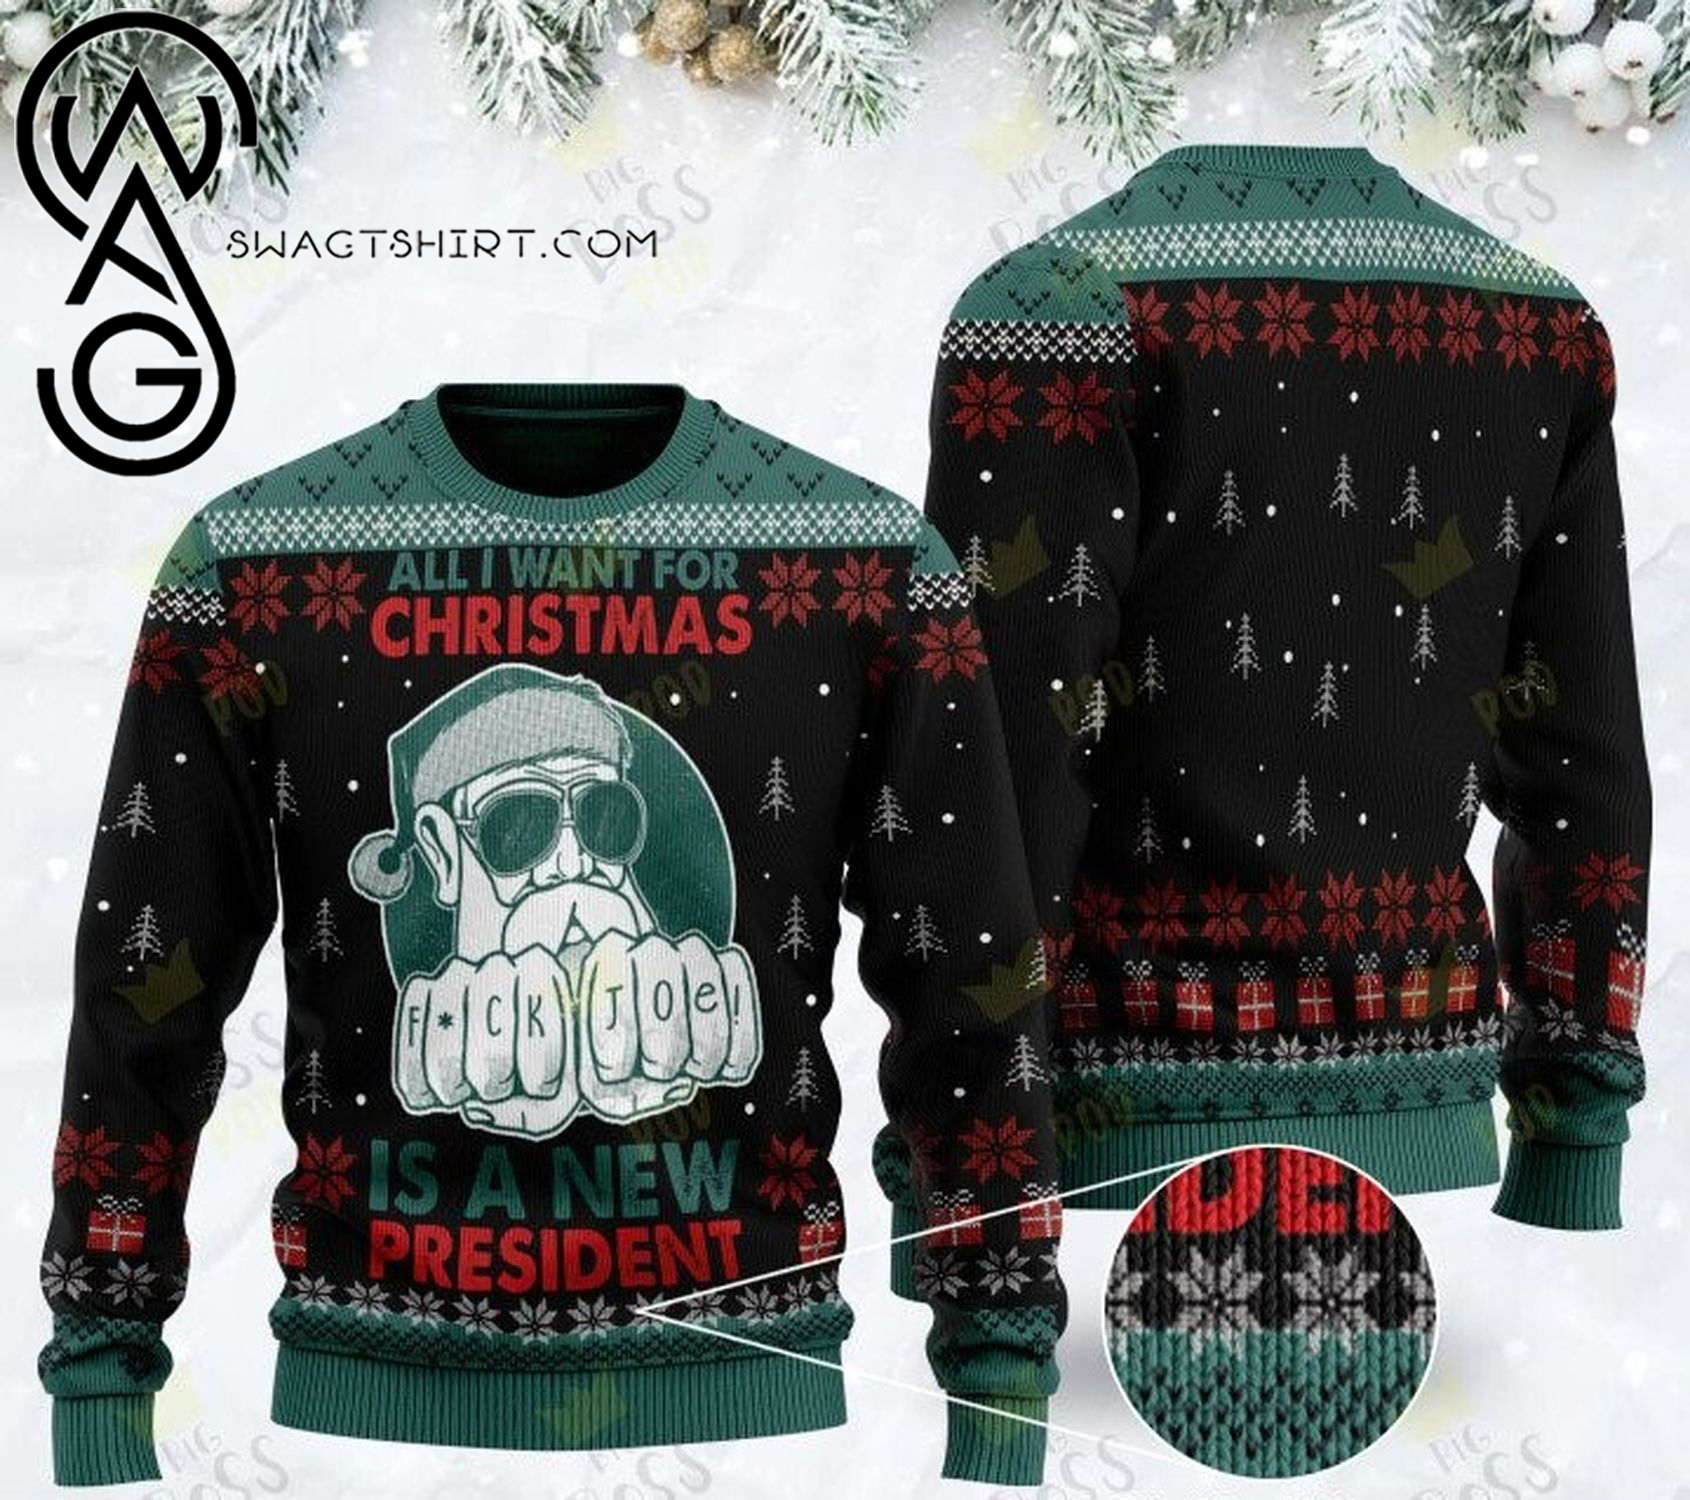 All I want christmas is a new president ugly christmas sweater